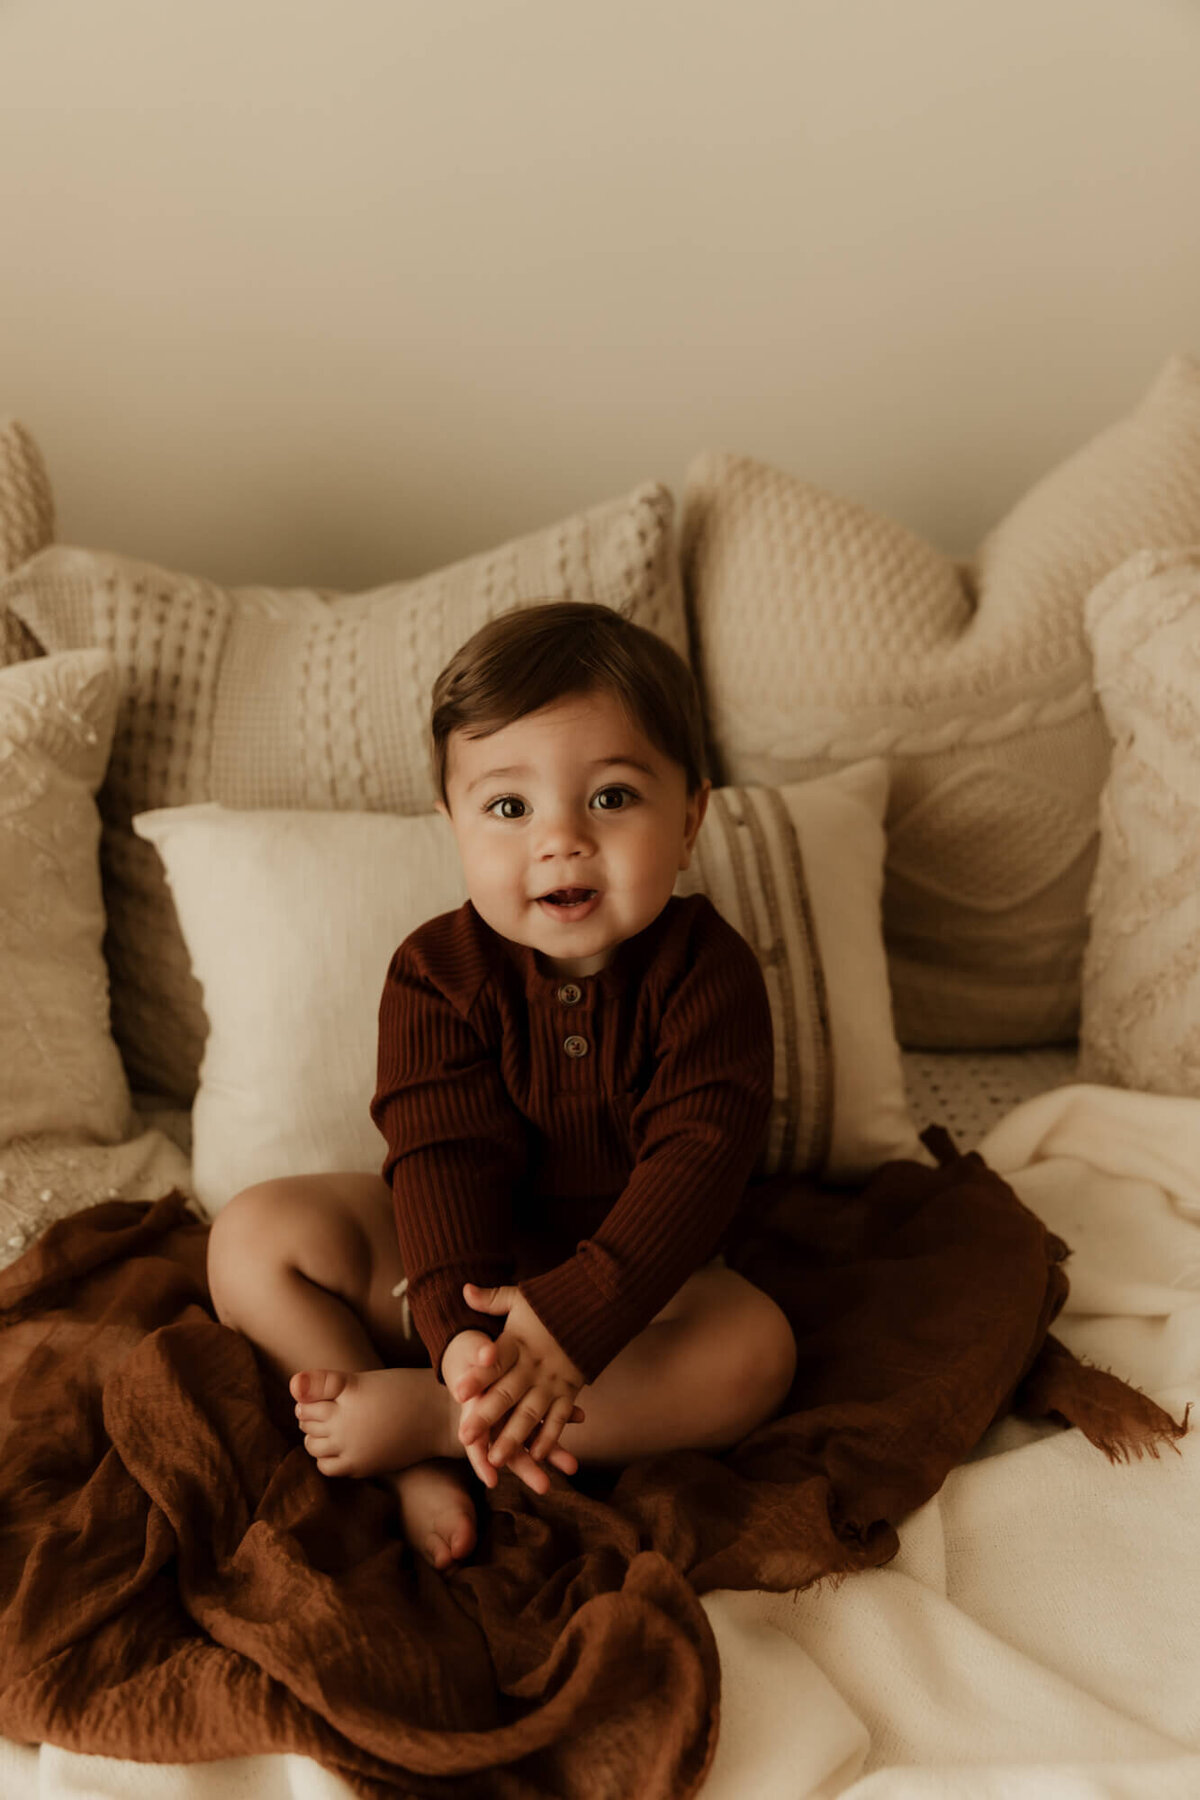 Baby clapping and smiling on a bed while sitting down.